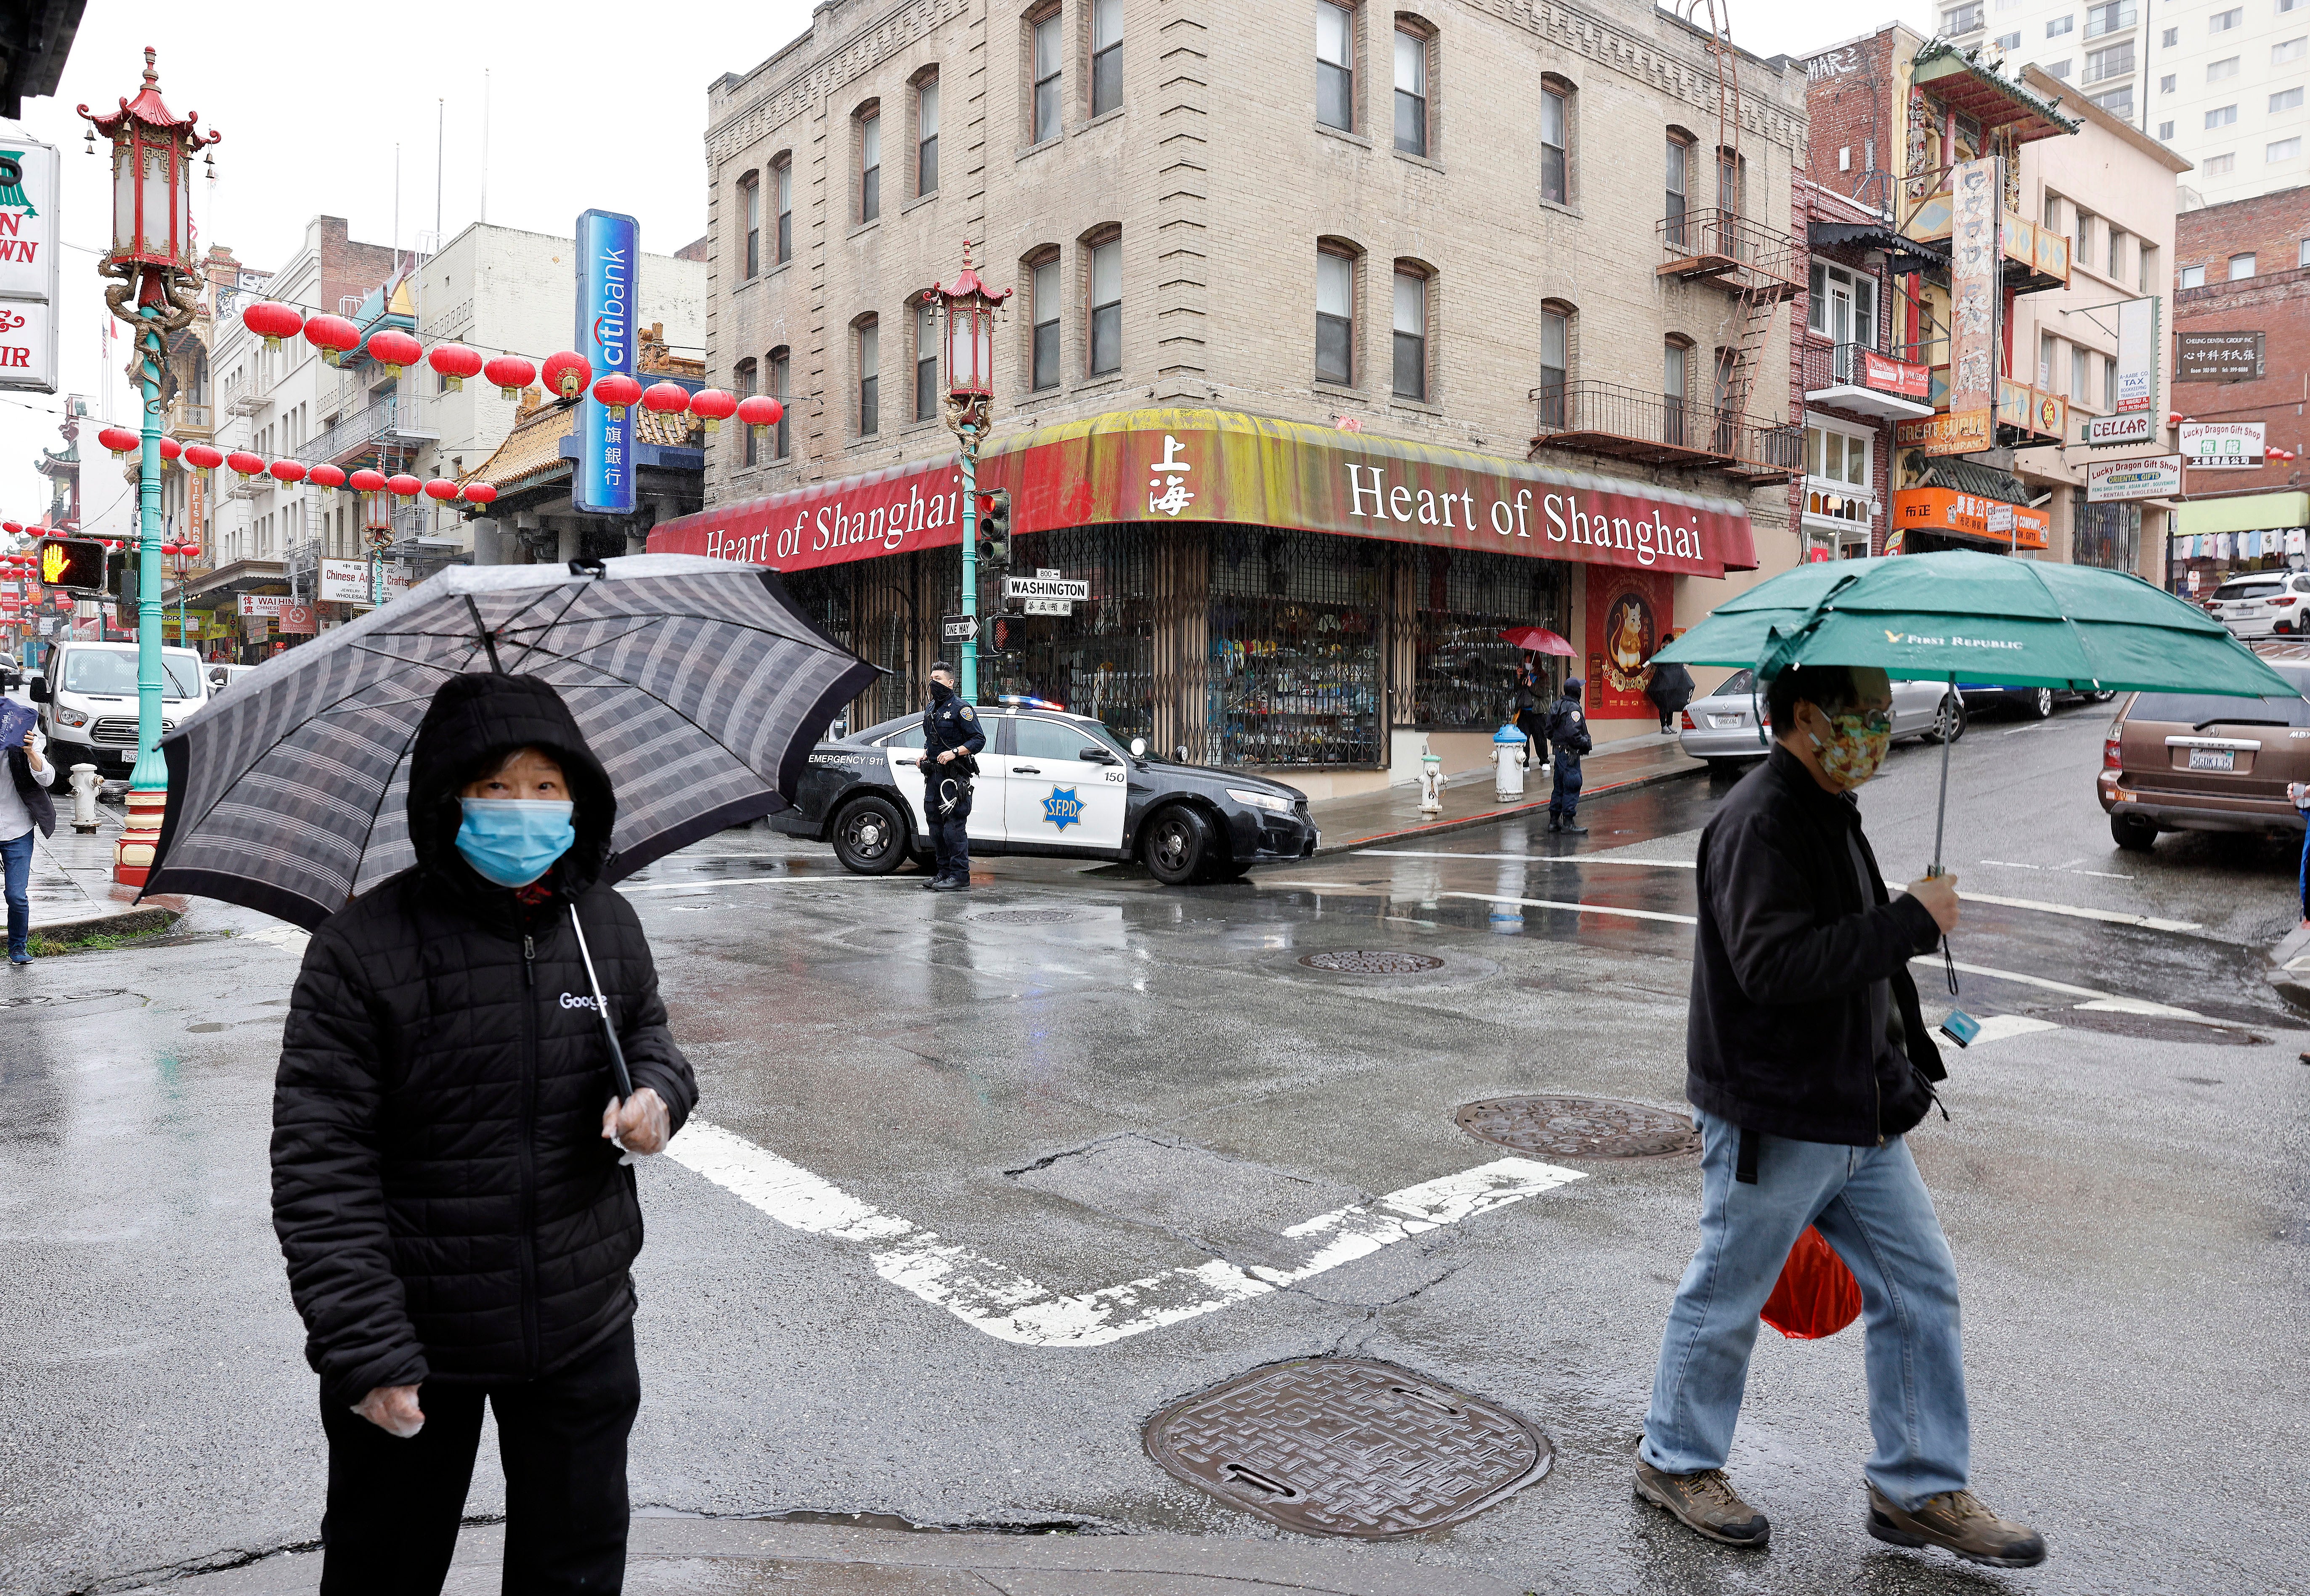 Pedestrians cross the street as San Francisco Police patrol their beat in Chinatown on 18 March